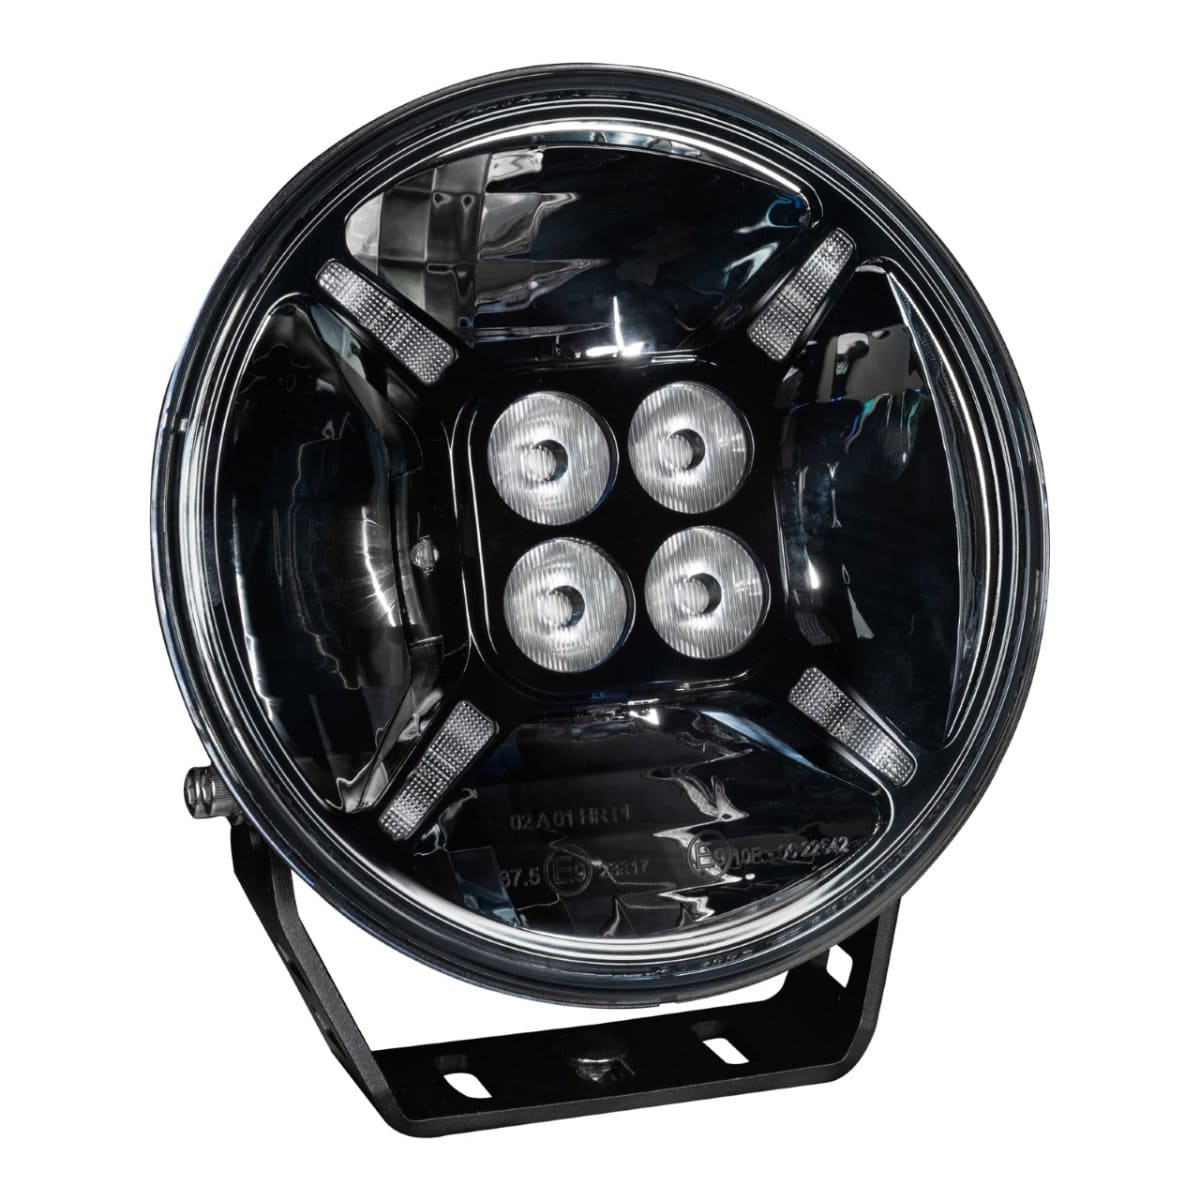 Oracle Lighting Launches Multifunction LED Spotlight For Jeeps, Trucks, & Off-Road Vehicles